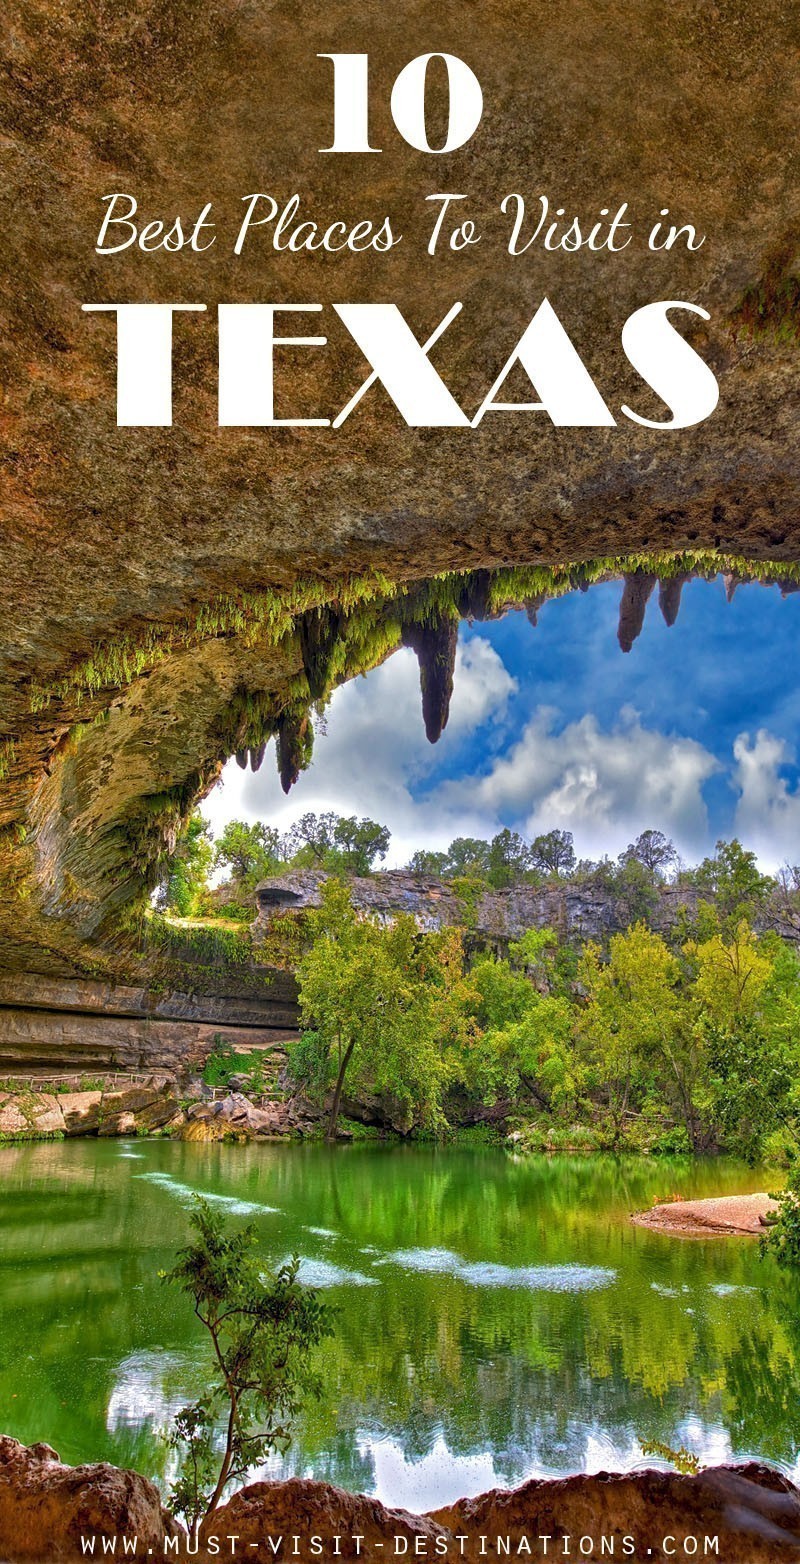 Here is an overview of the TOP 10 Tourist Attractions in Texas You Should Visit!